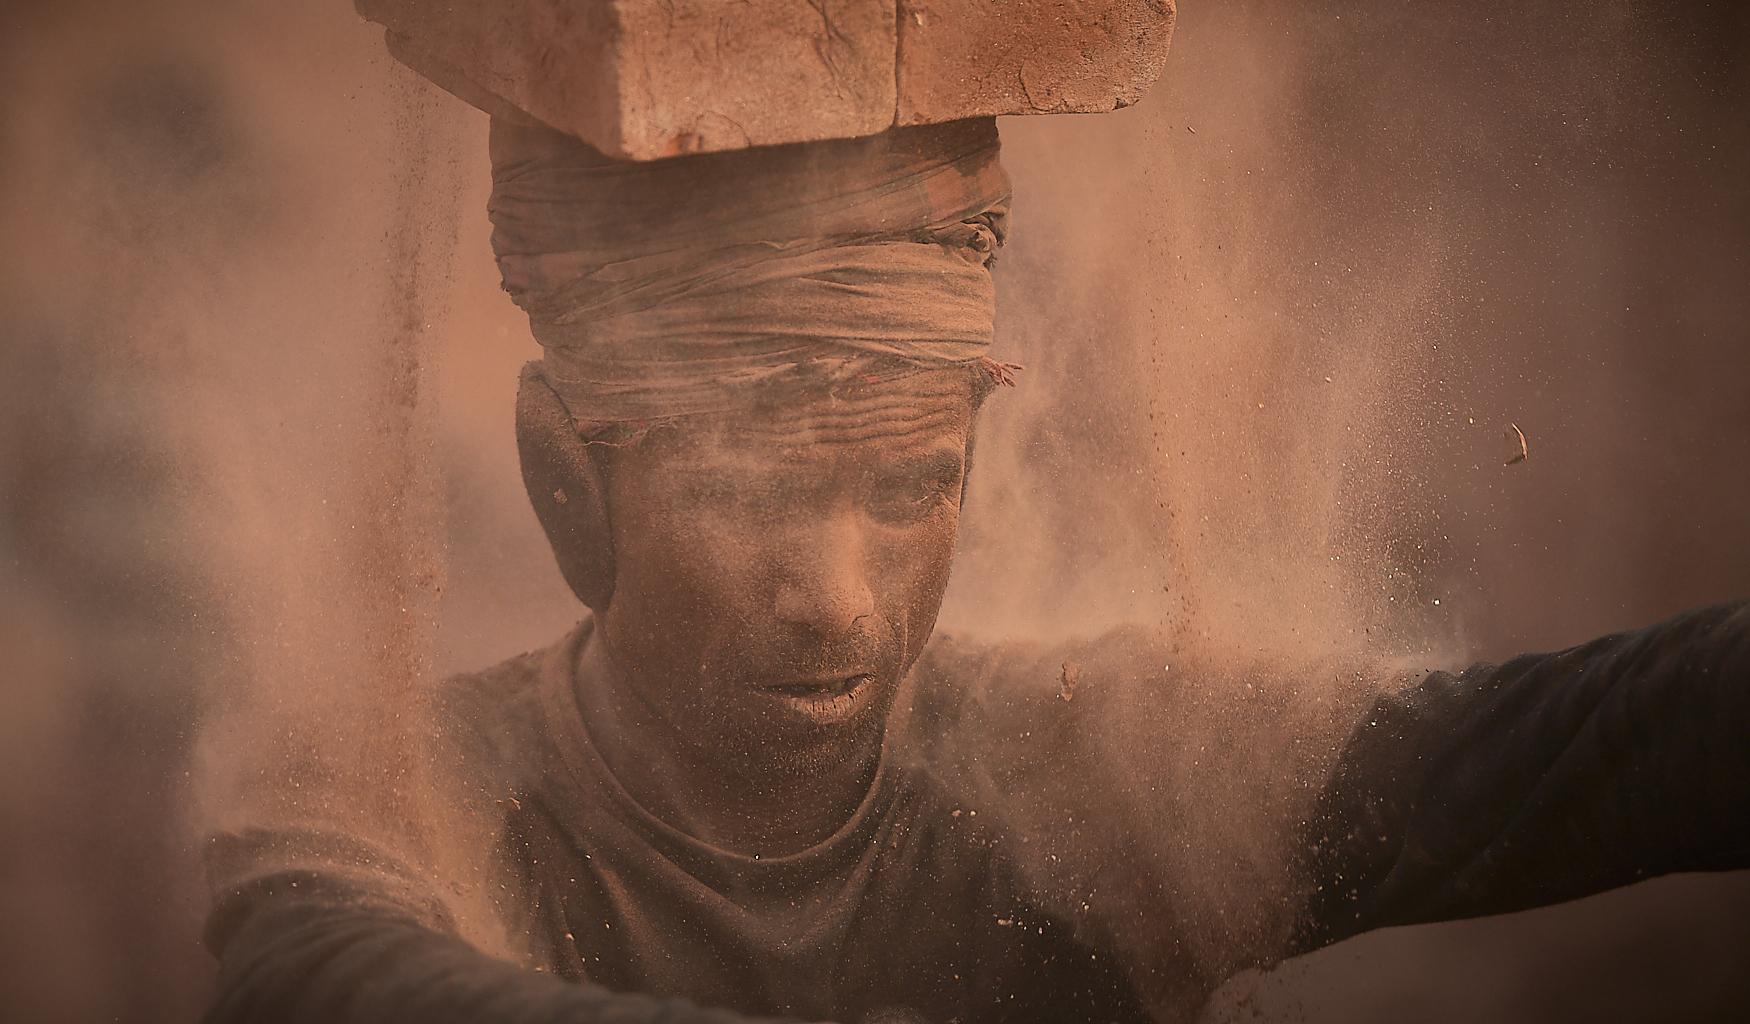 worker removing baked bricks from the kiln